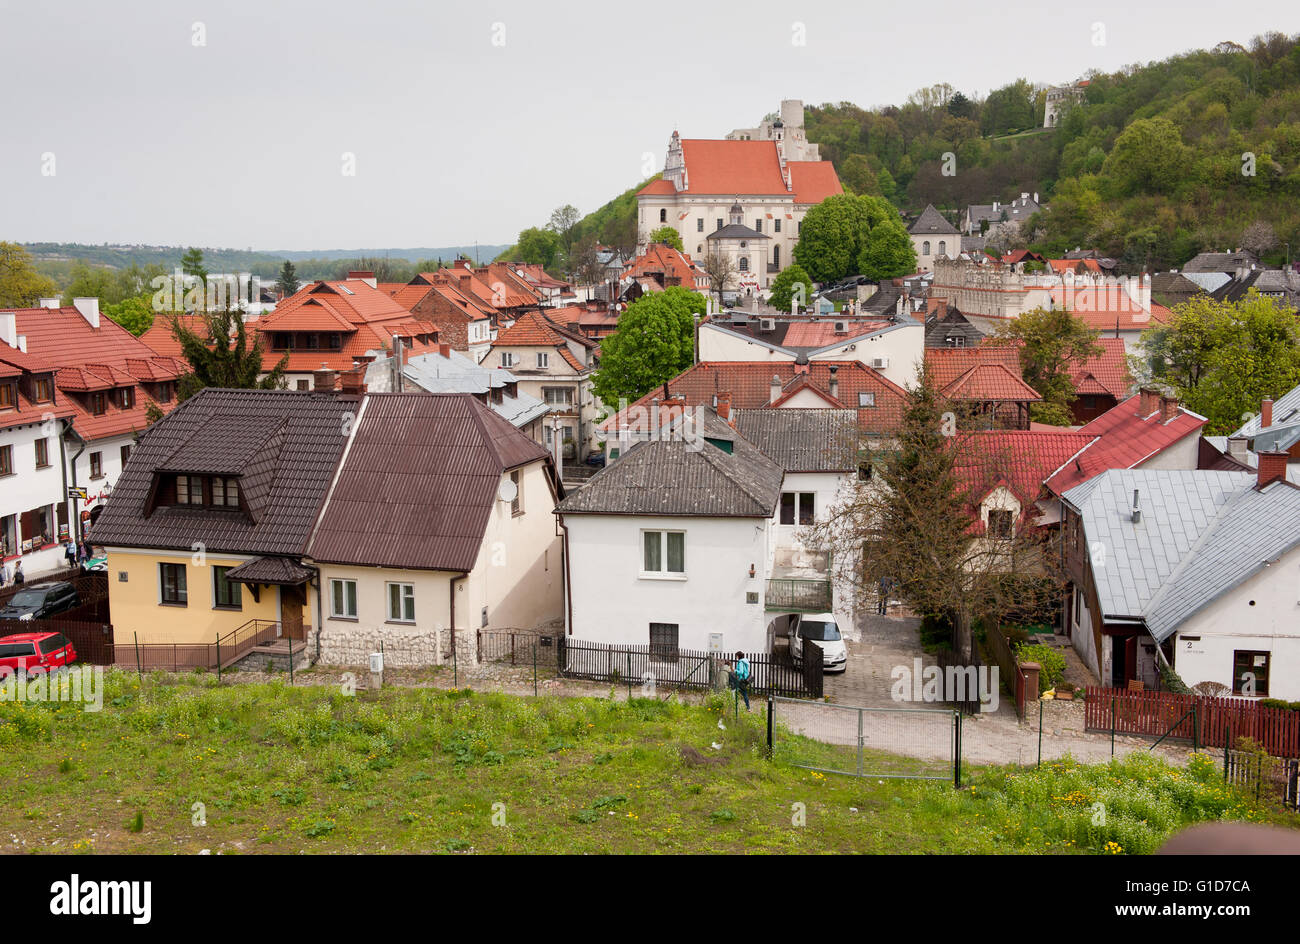 The Parish Church in Kazimierz Dolny, Poland, Europe, picturesque landscape view at building exterior across town. Stock Photo